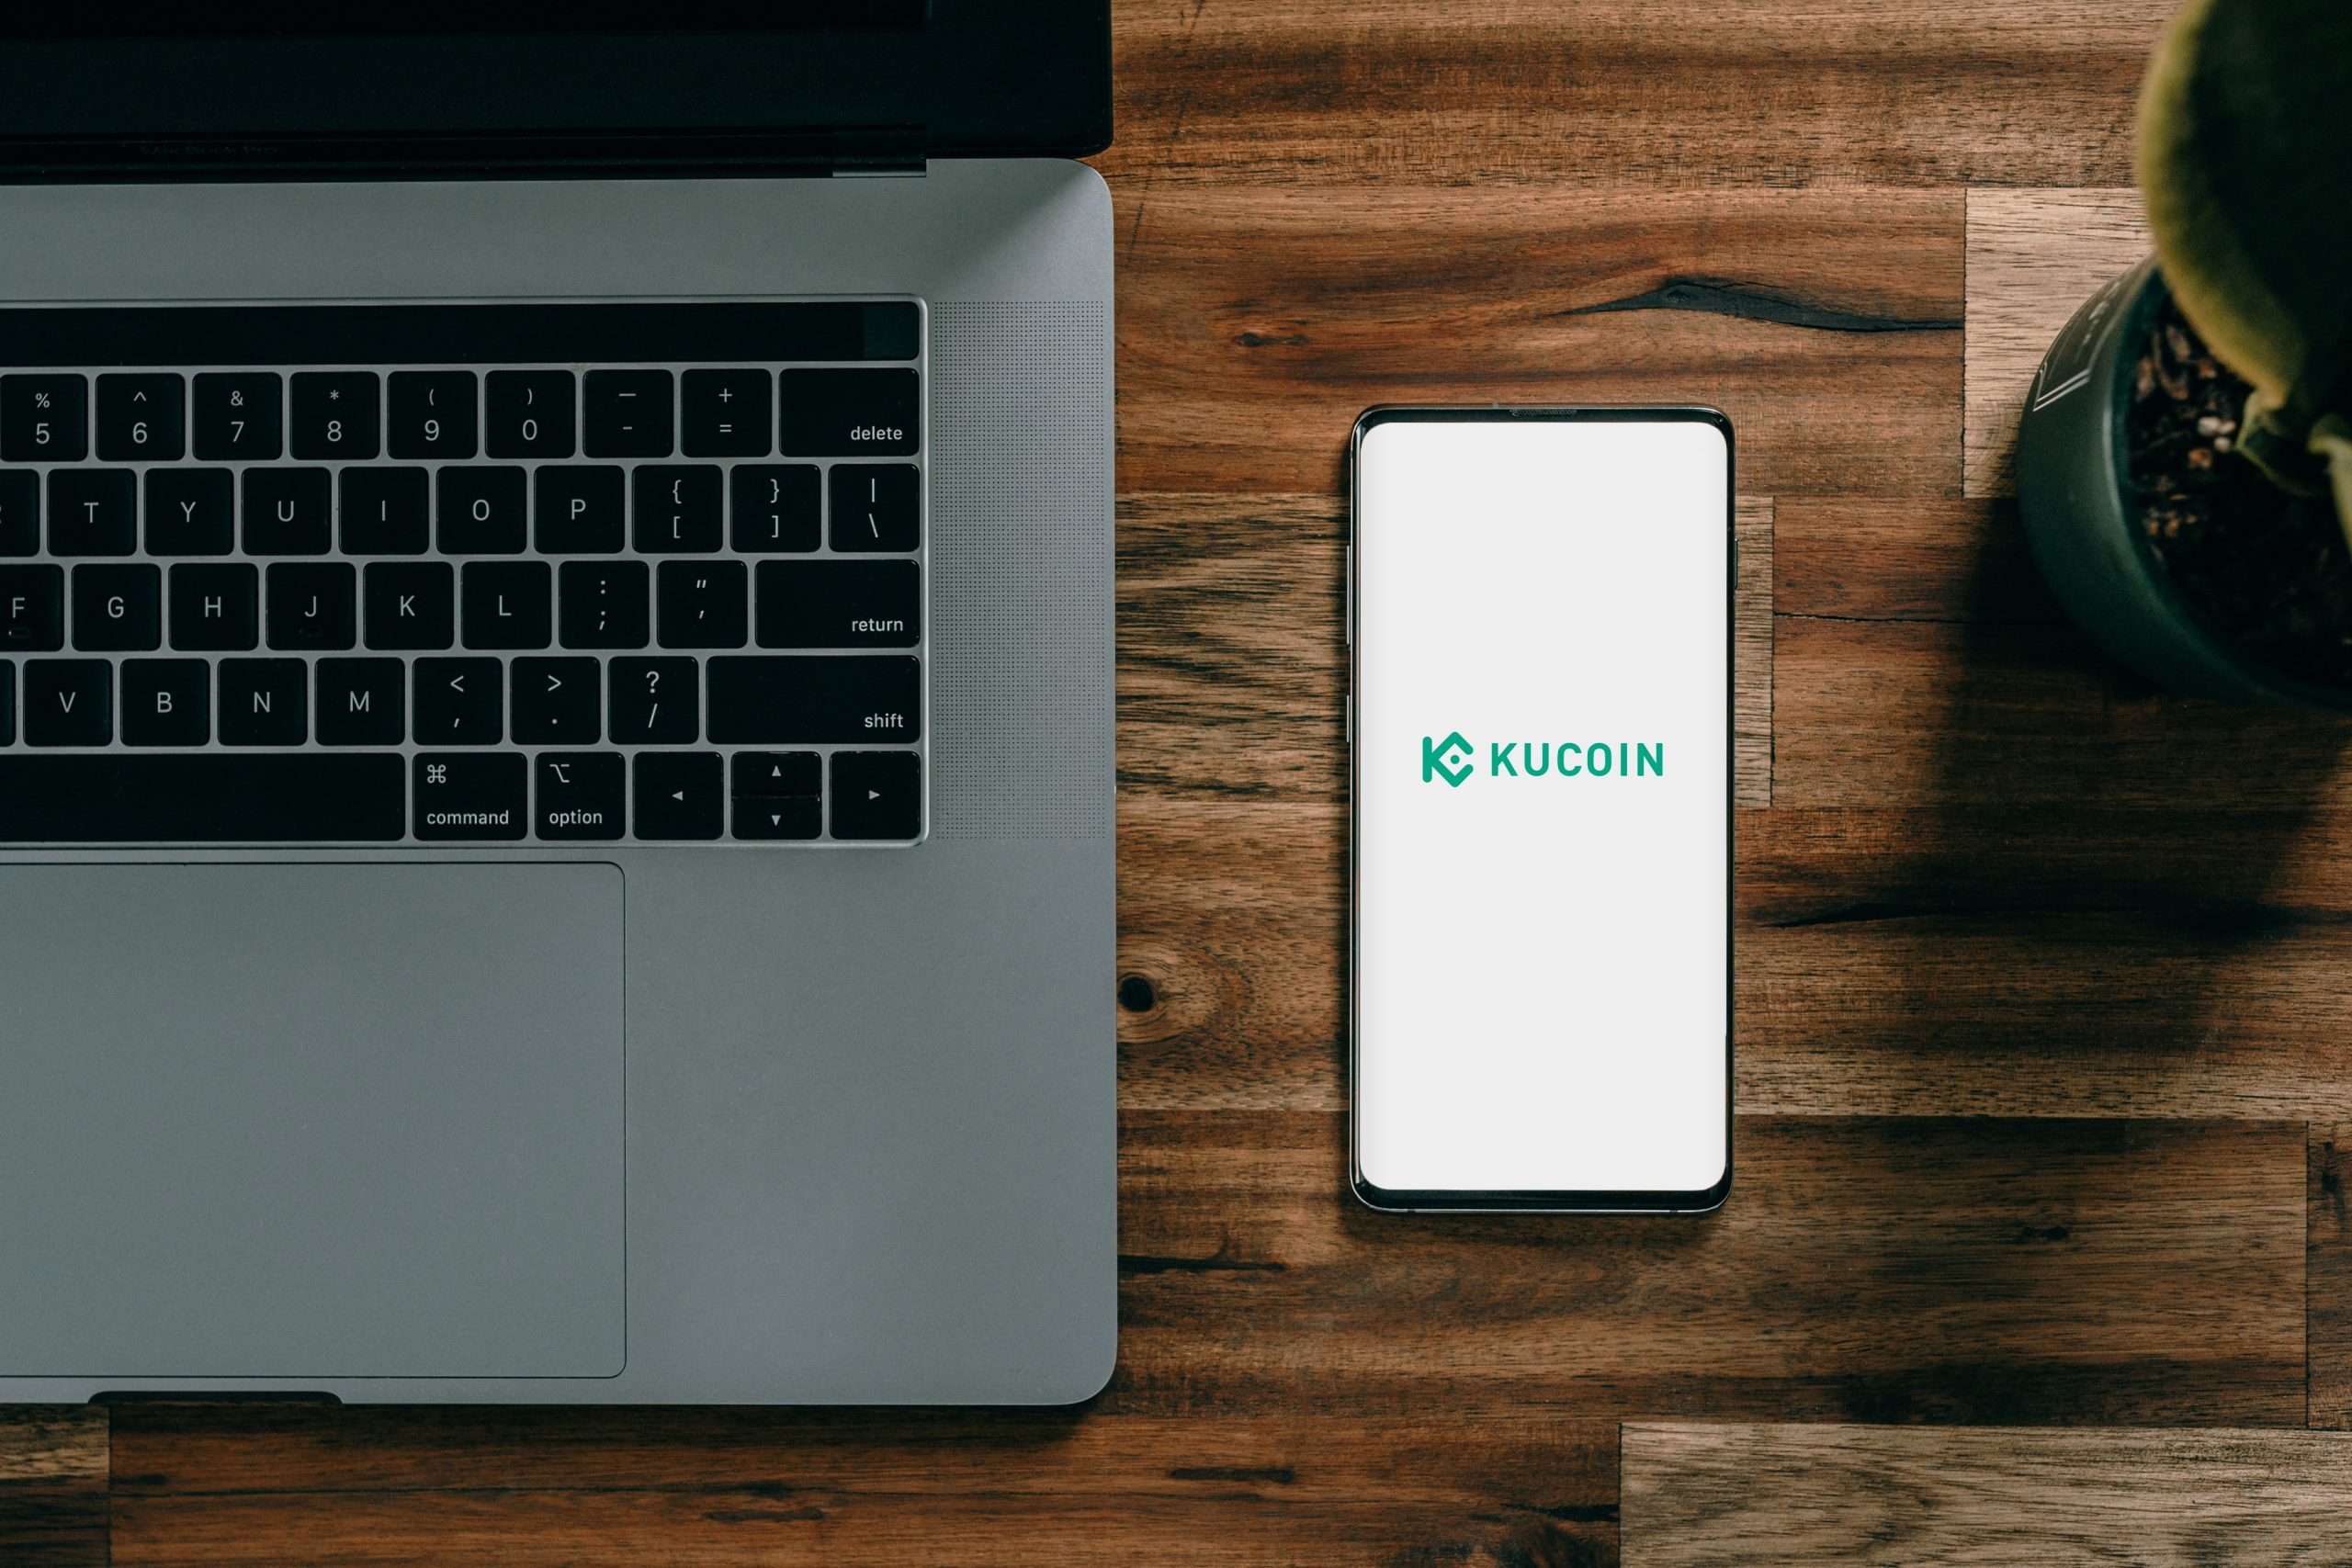 In a spinoff, KuCoin Wallet is now known as Halo Wallet